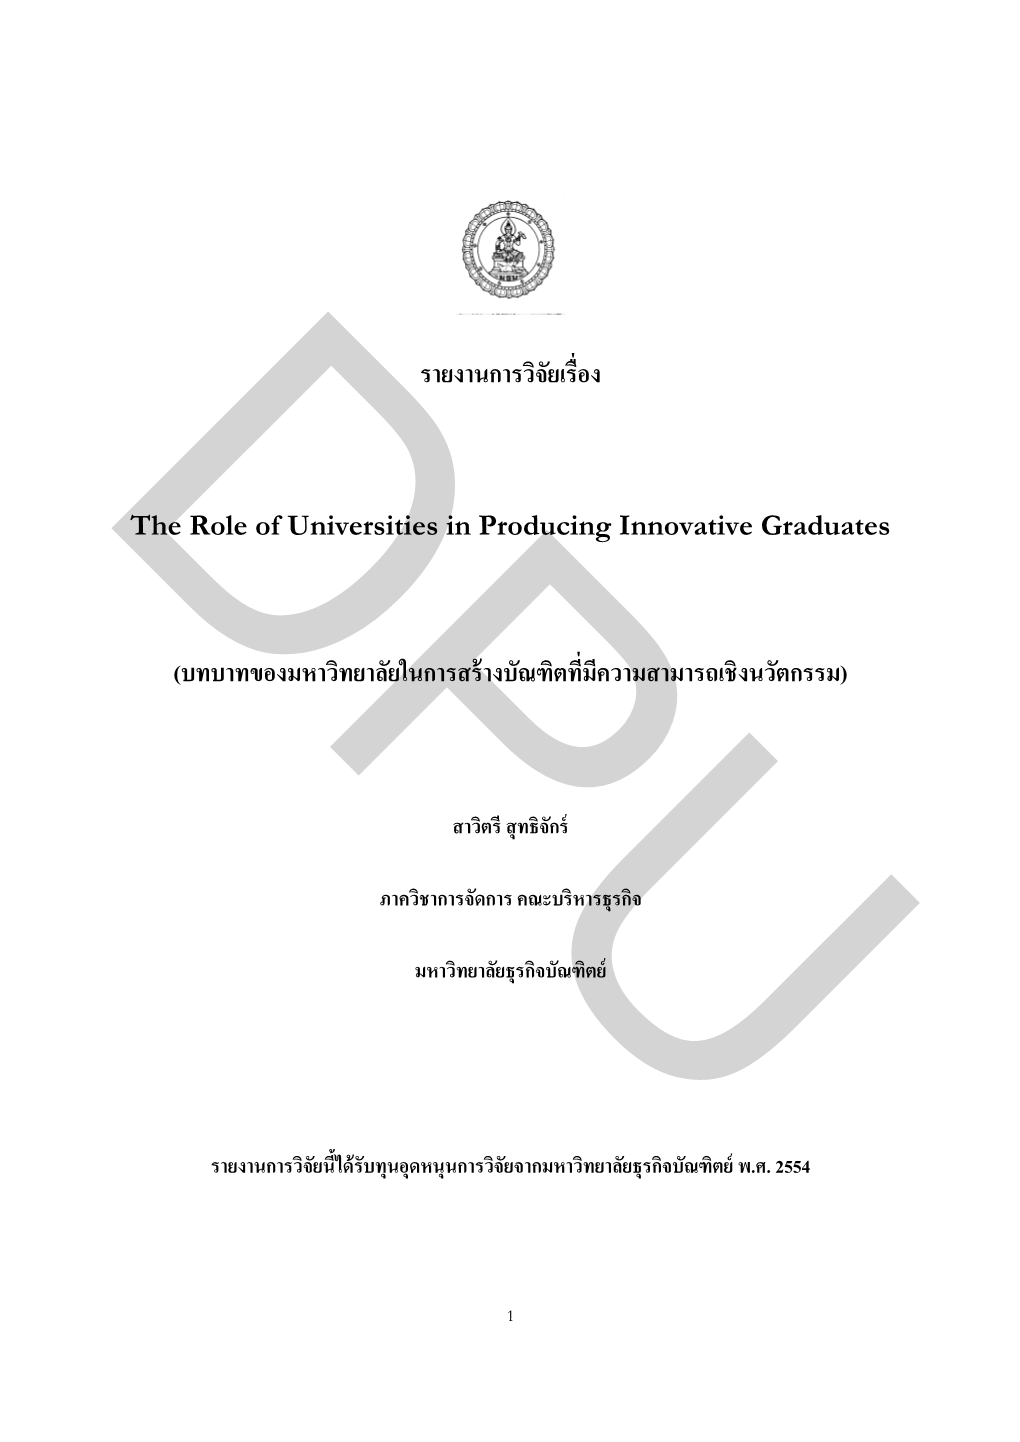 The Role of Universities in Producing Innovative Graduates